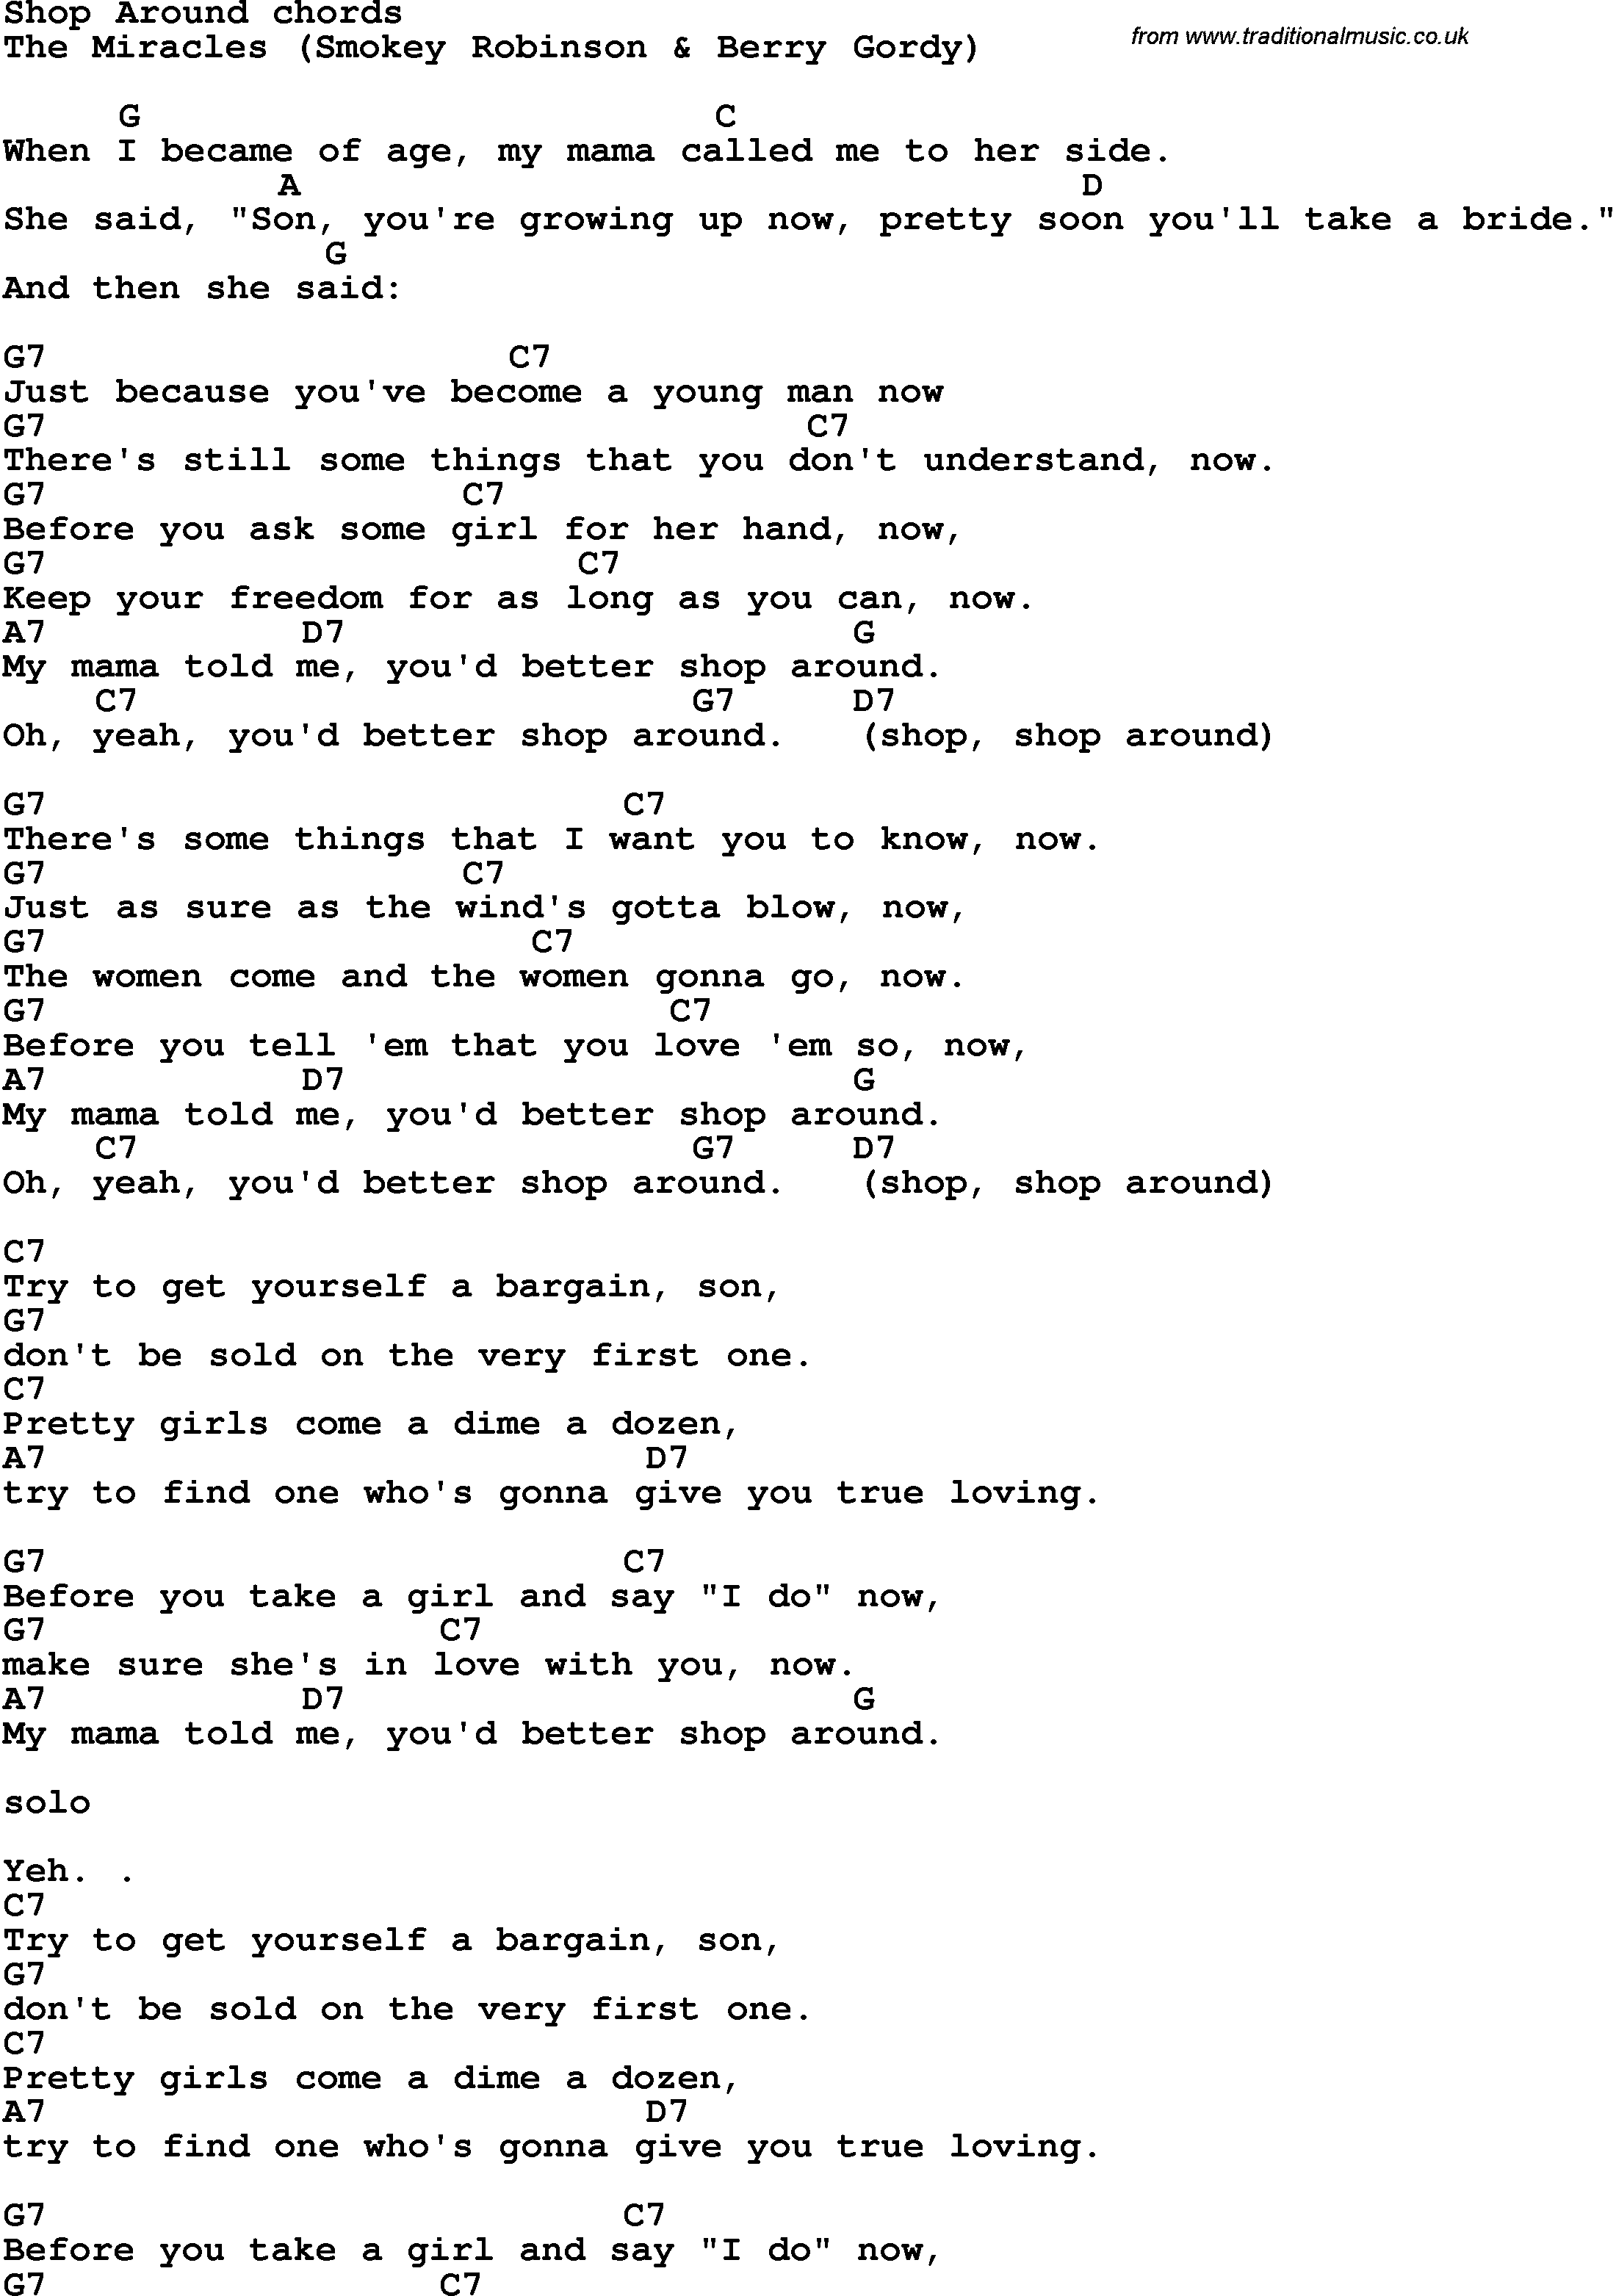 Song Lyrics with guitar chords for Shop Around